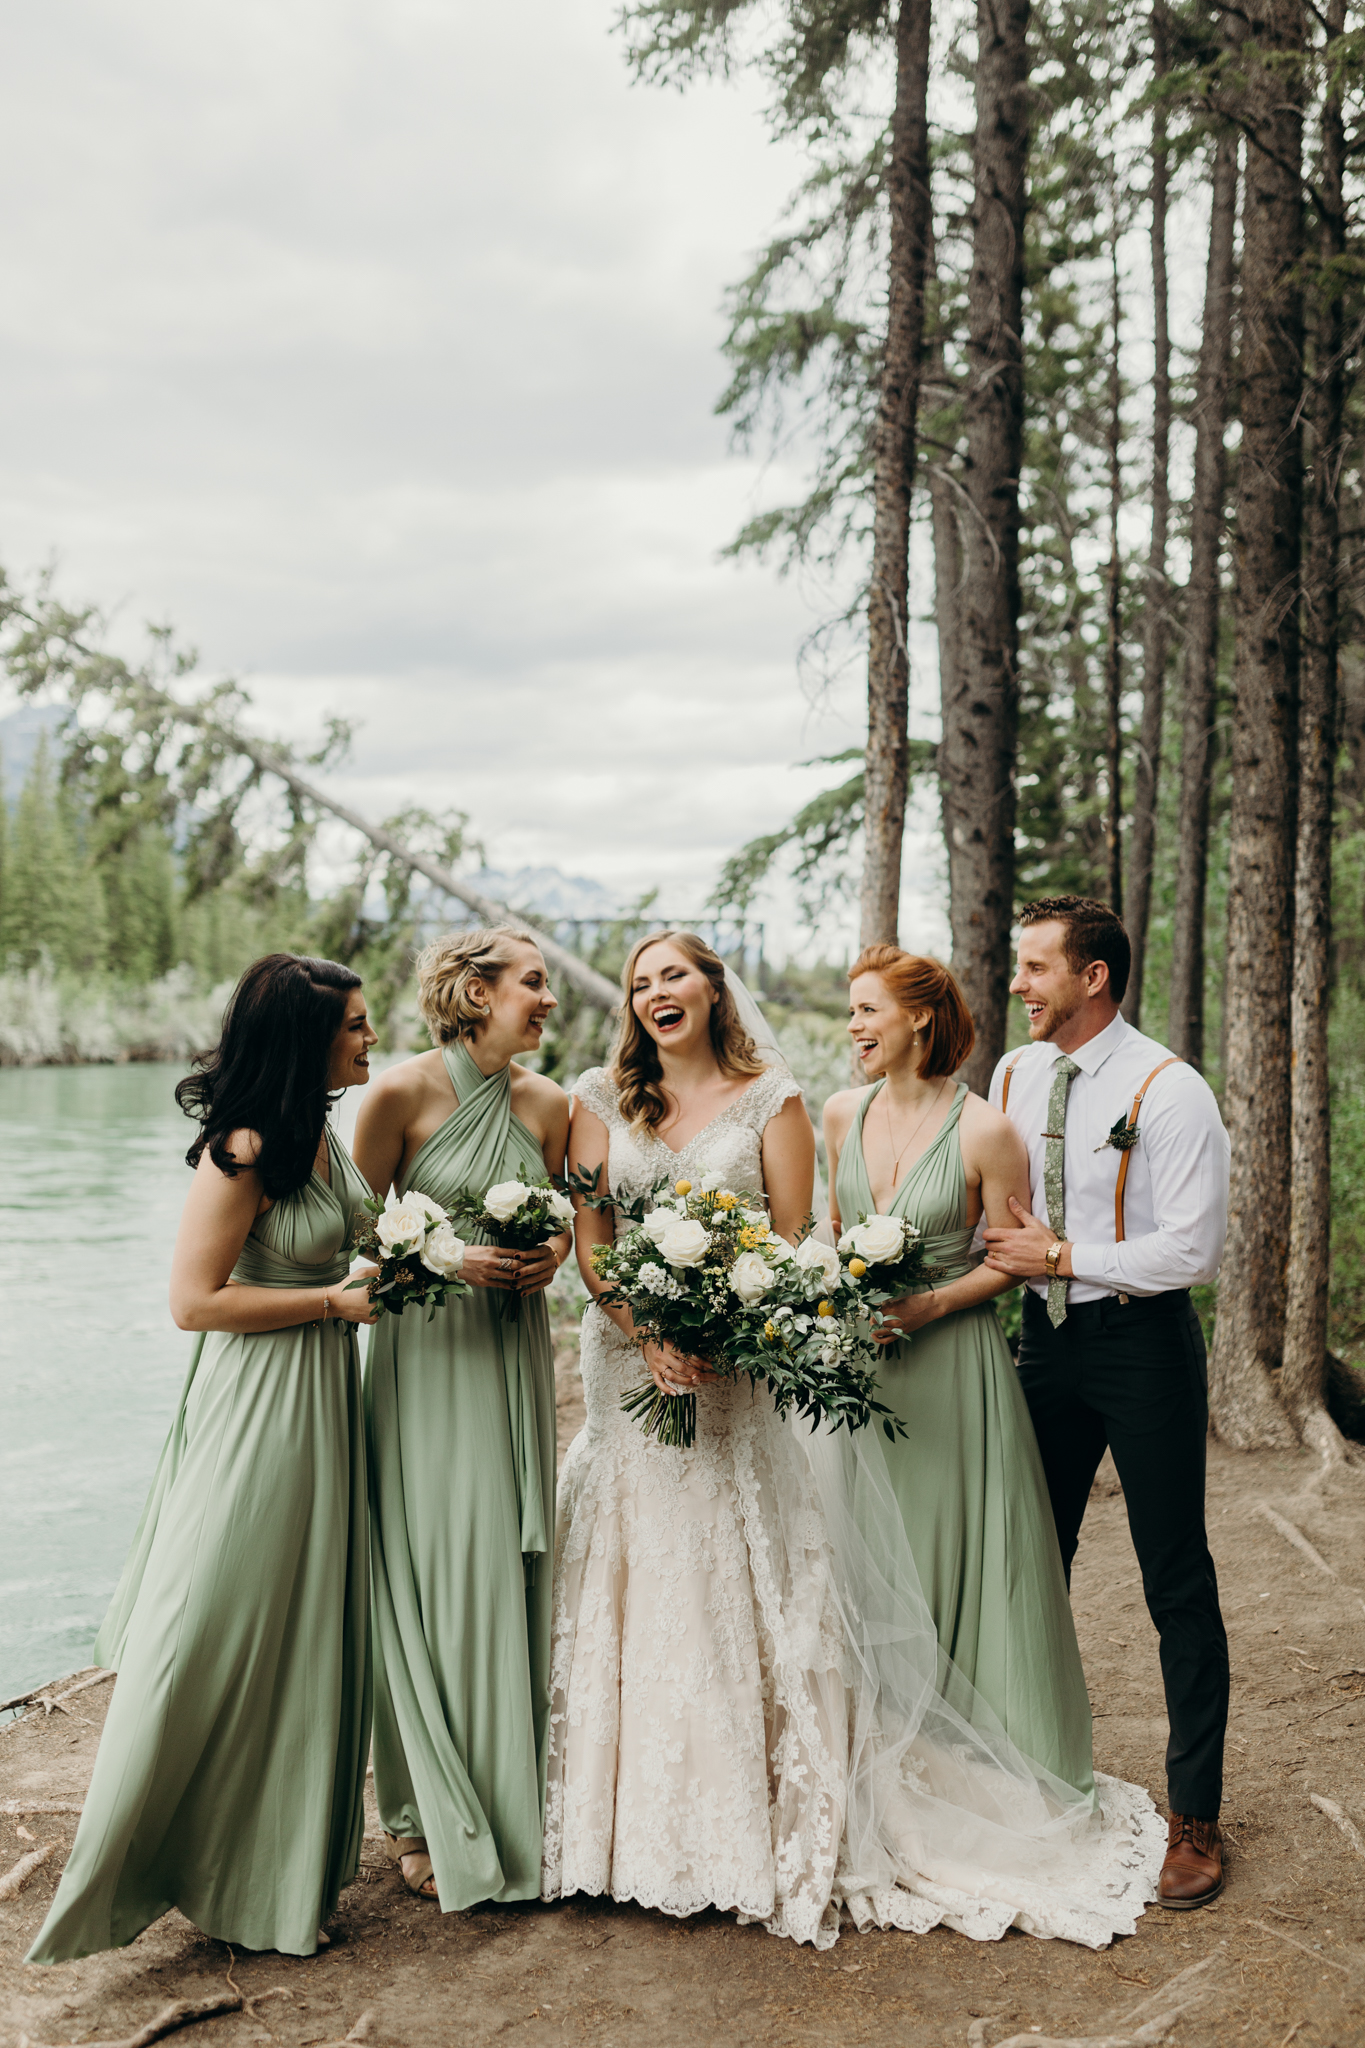 Brides and bridesmaids portrait at Bow River Canmore destination wedding